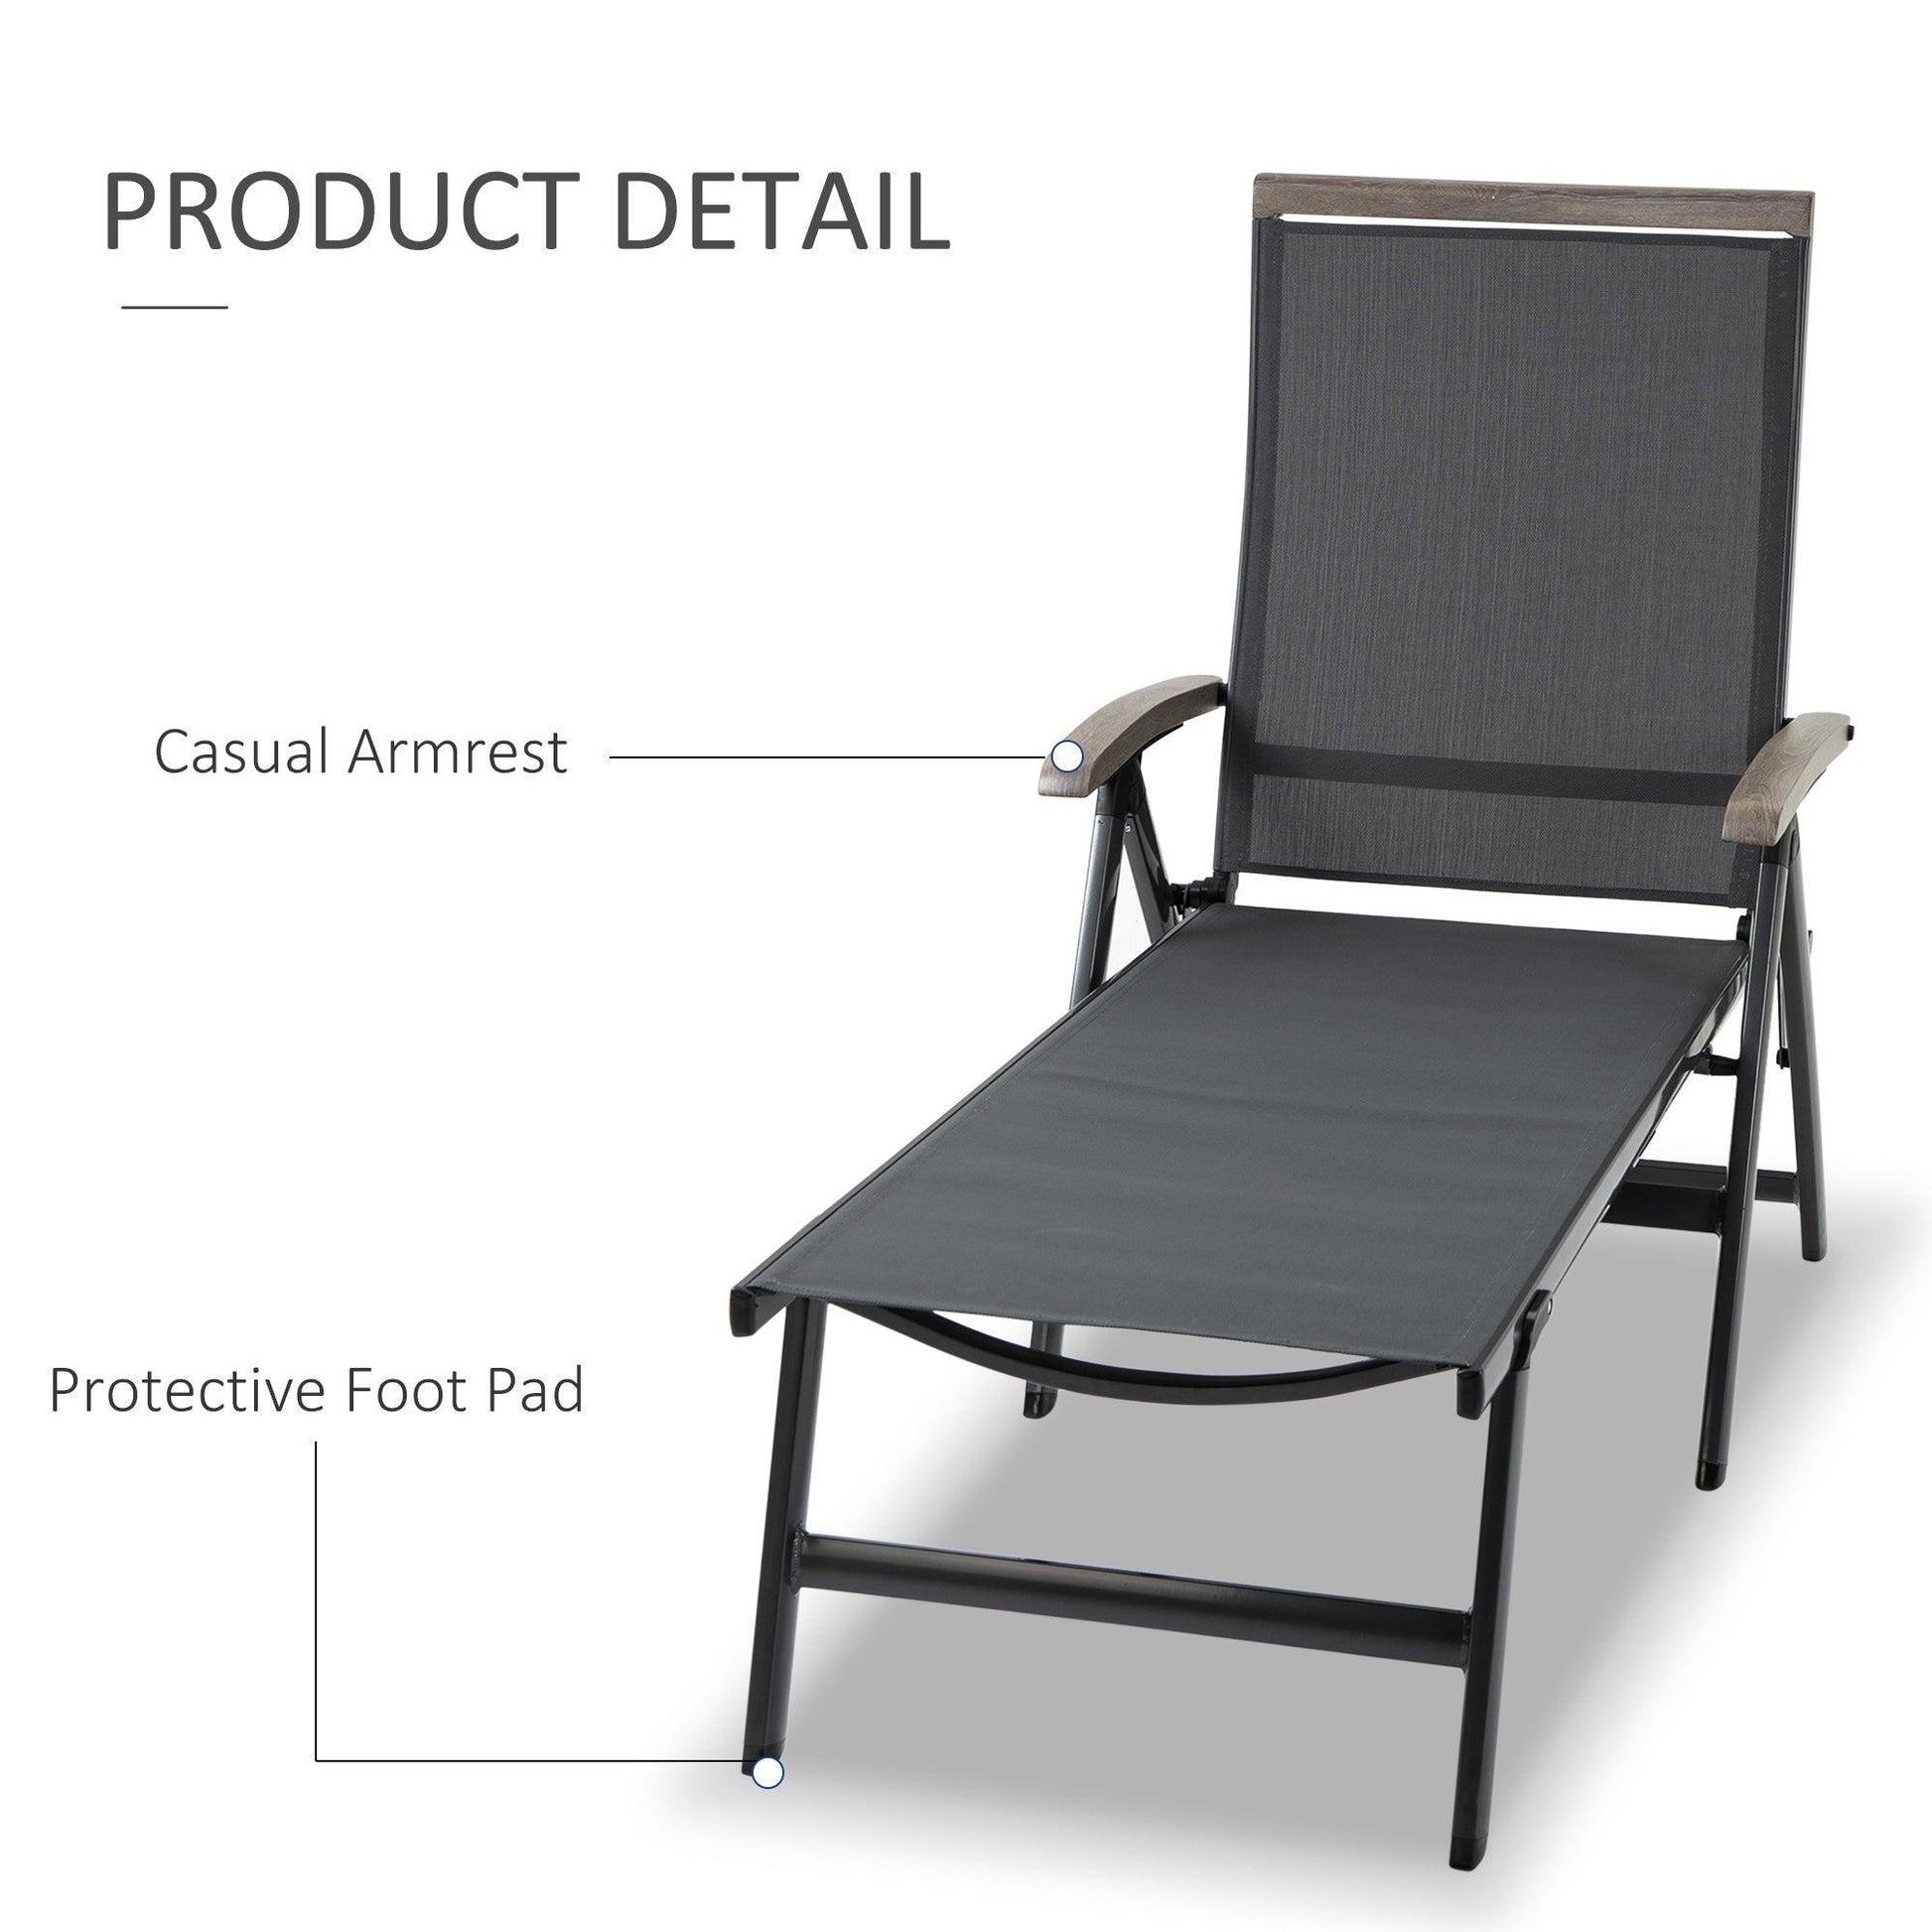 Outsunny Outdoor Folding Sun Lounger - Adjustable Chaise Lounge Chair - ALL4U RETAILER LTD